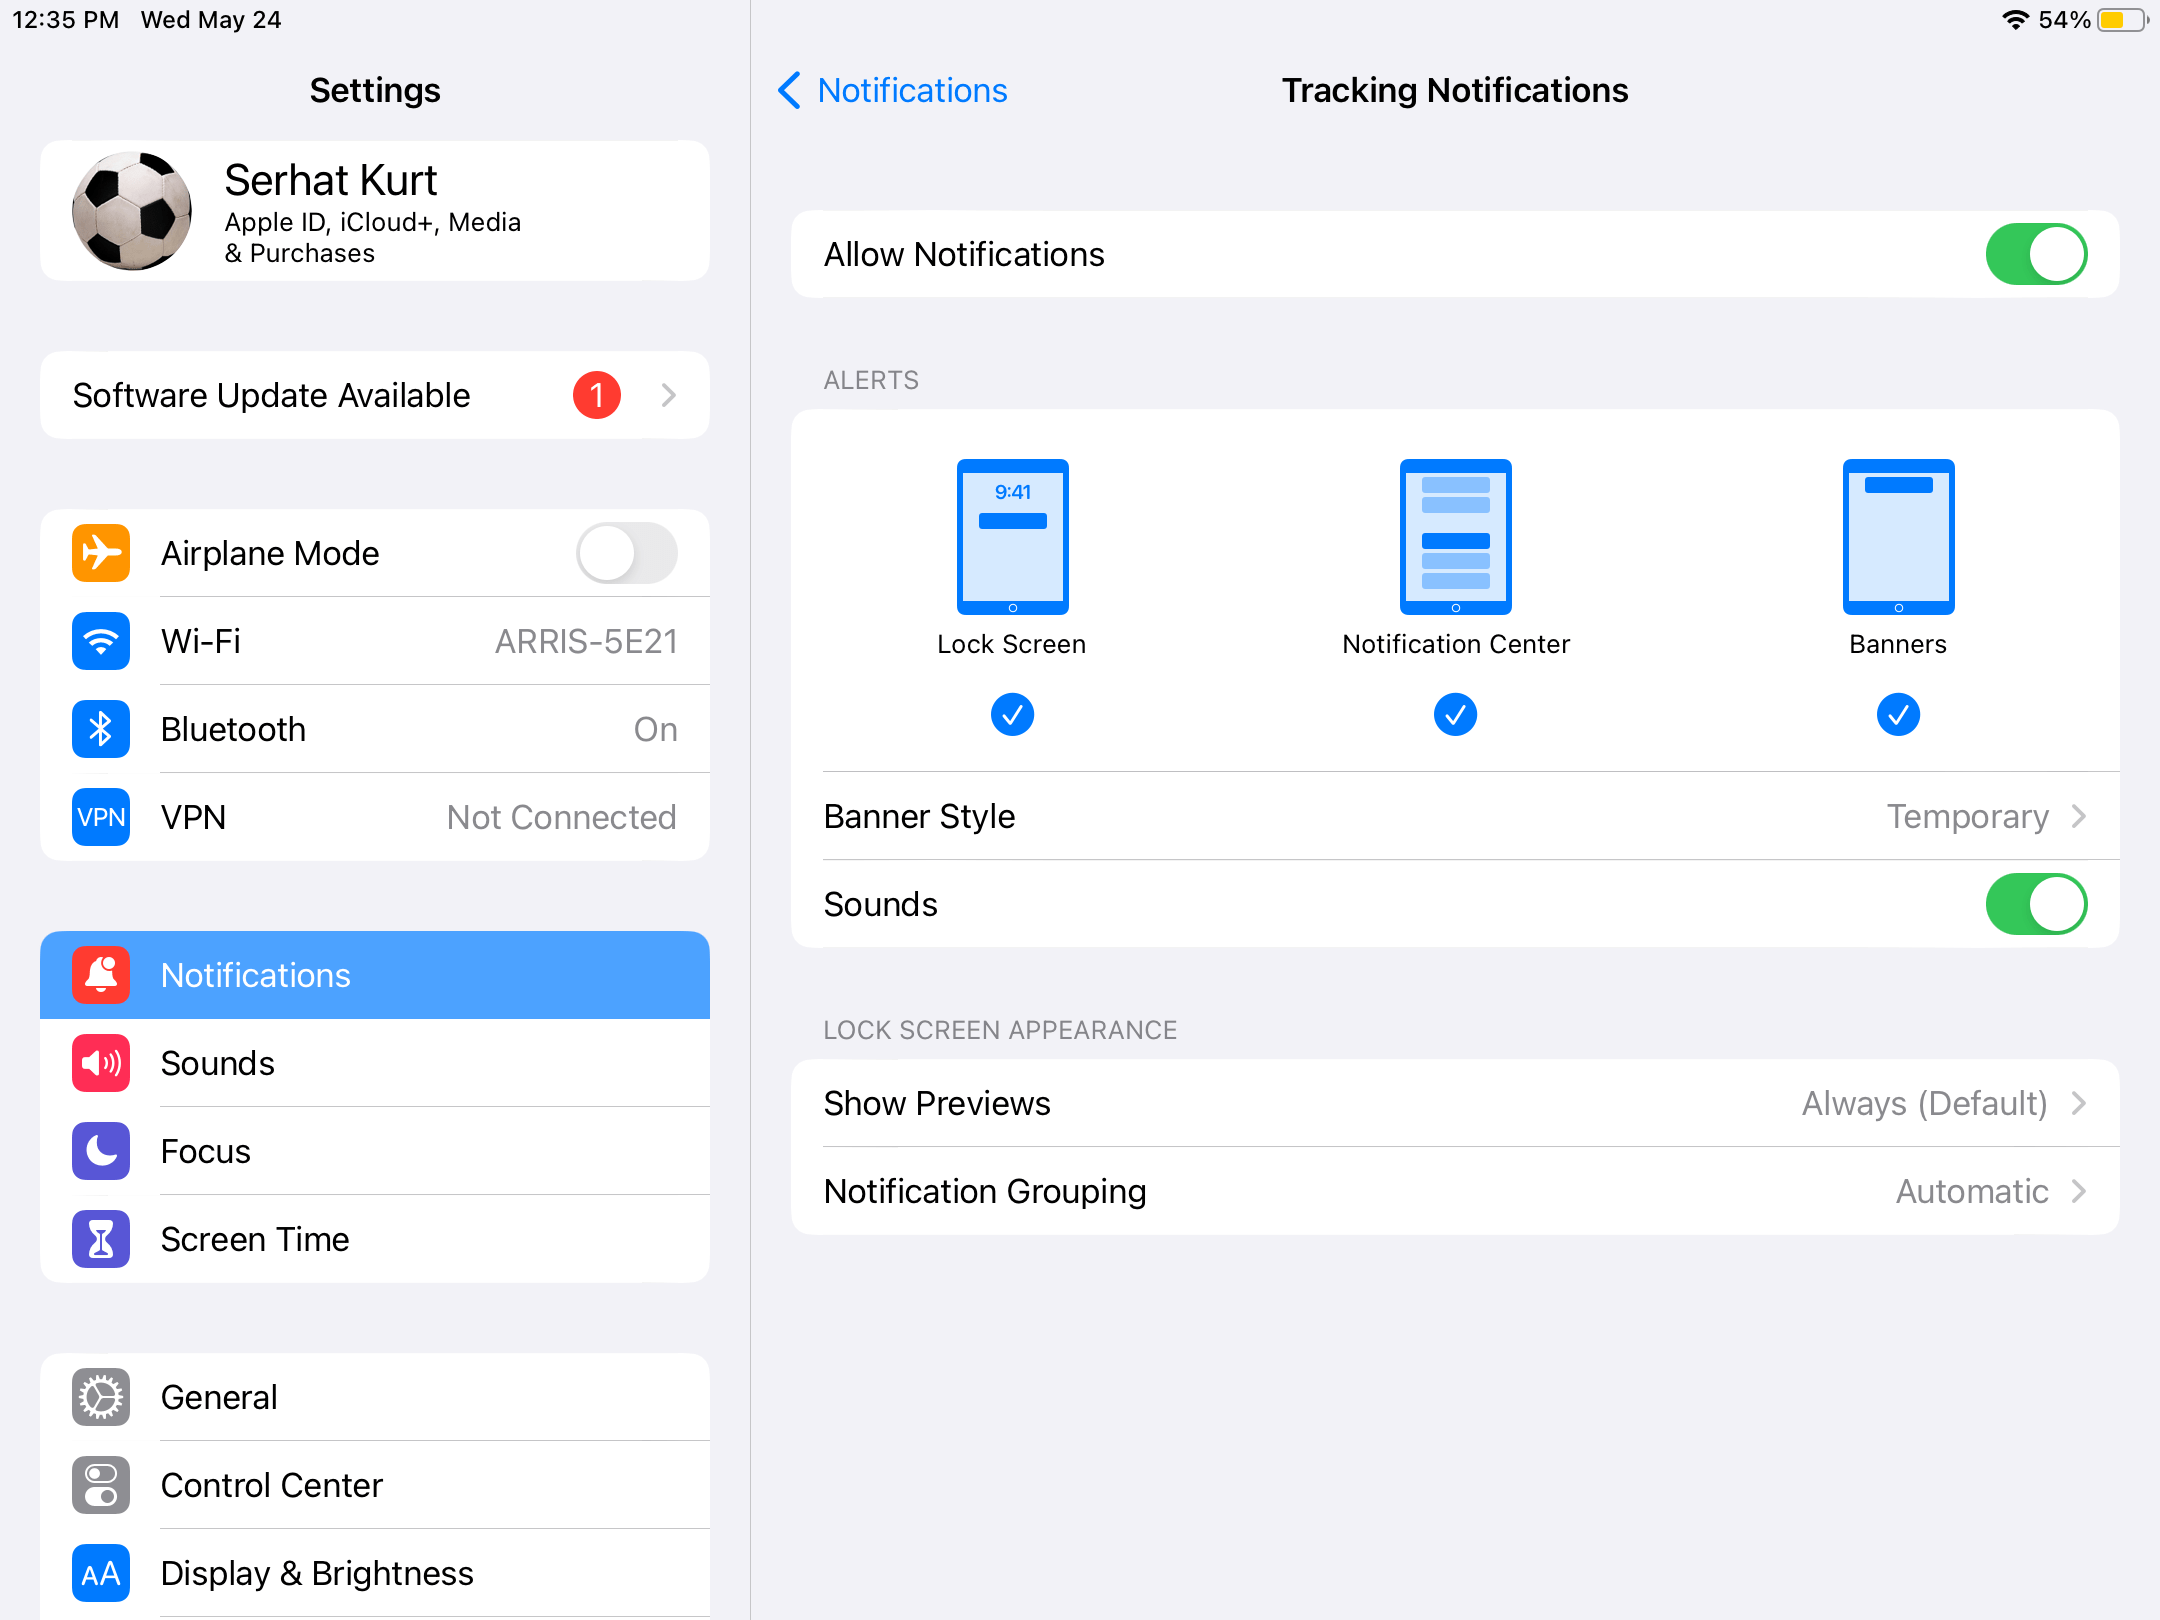 Tracking Notifications screen in Settings > Notifications